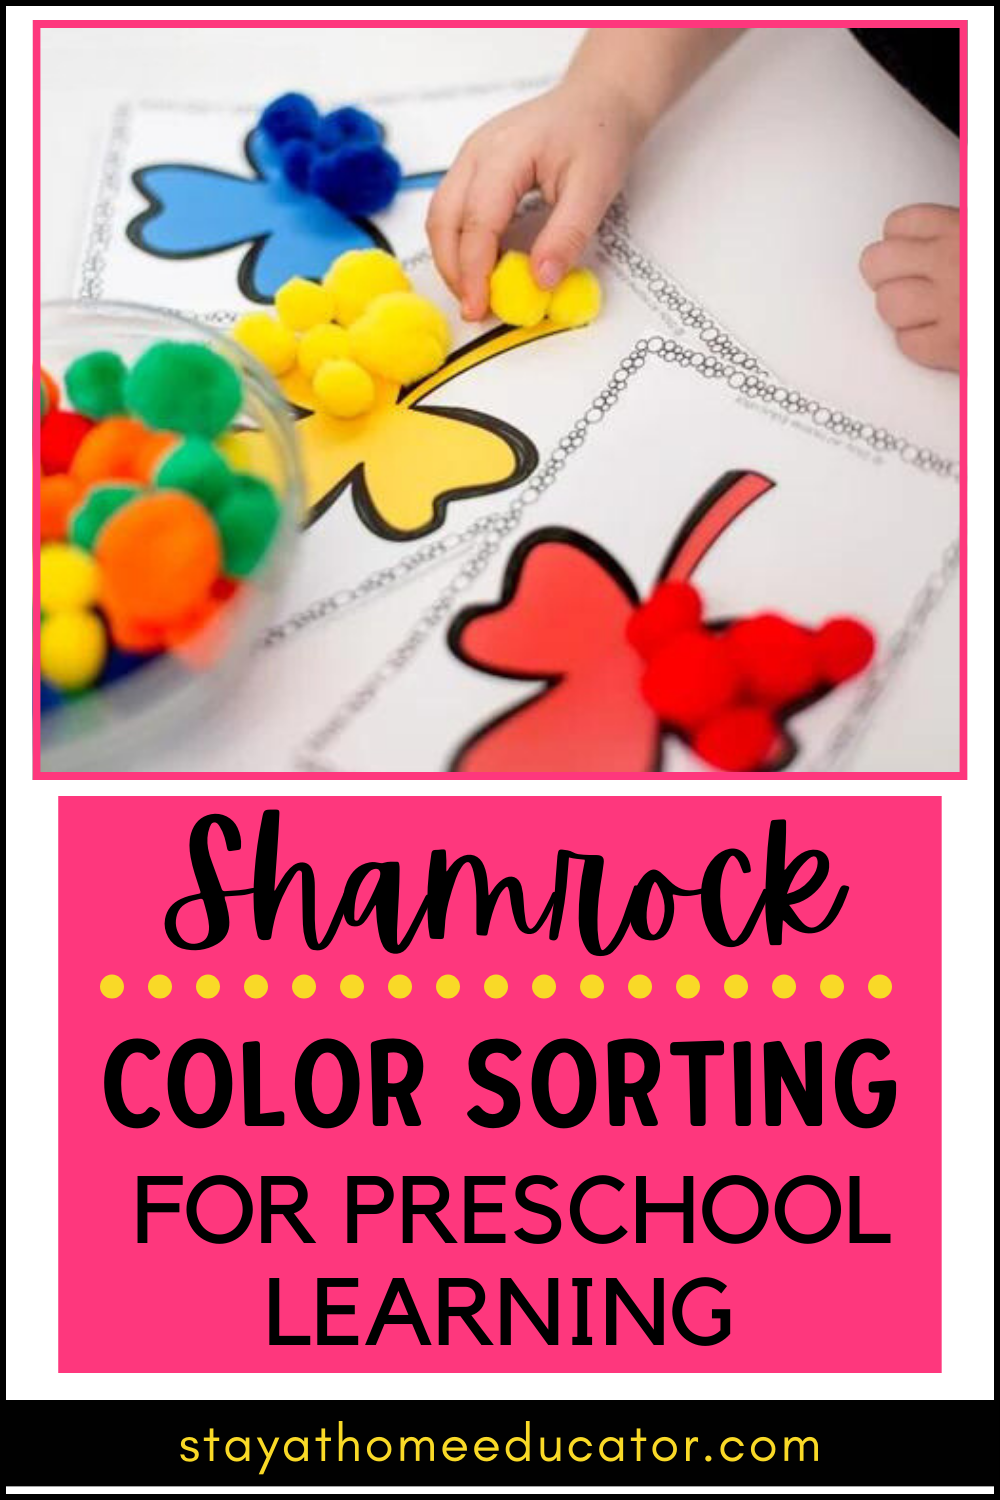 rainbow shamrock color sorting cards with colored pom-poms | child's hand sorts yellow pom-poms on yellow shamrock | St. Patricks Day preschool lesson plans | rainbow theme preschool lesson plans | color sorting activities for preschoolers and toddlers |